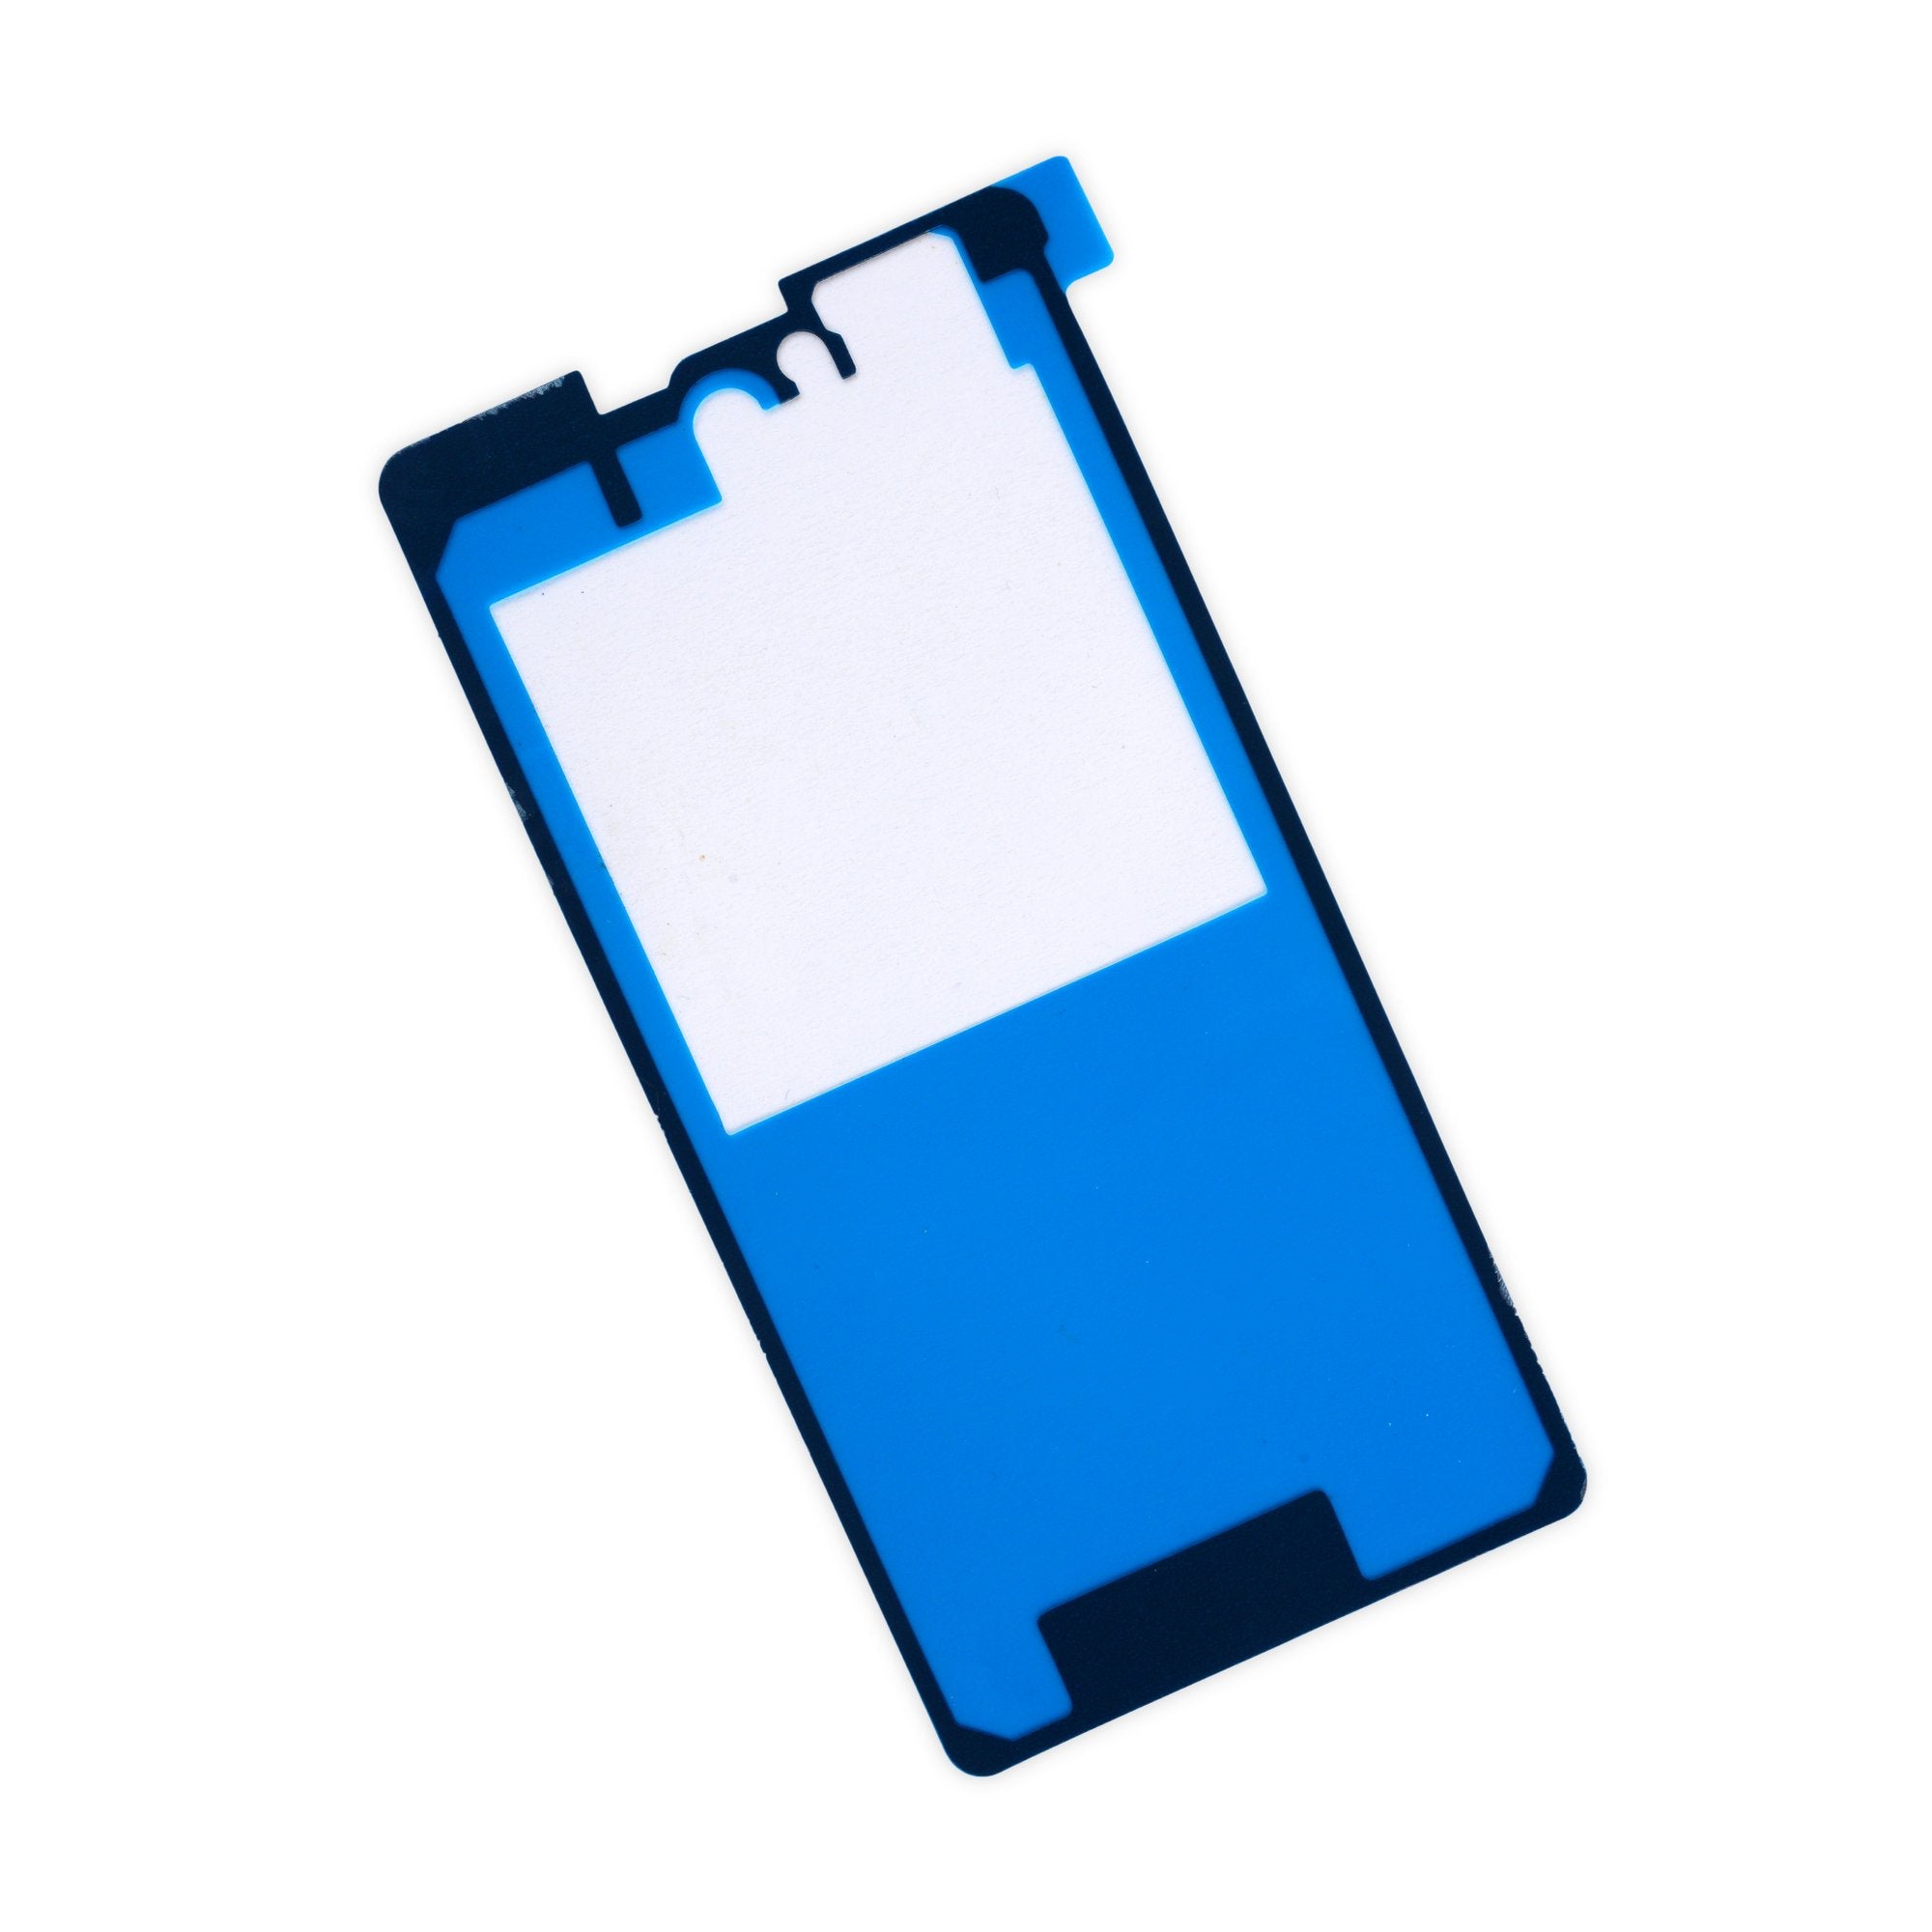 Sony Xperia Z1 Compact Back Cover Adhesive